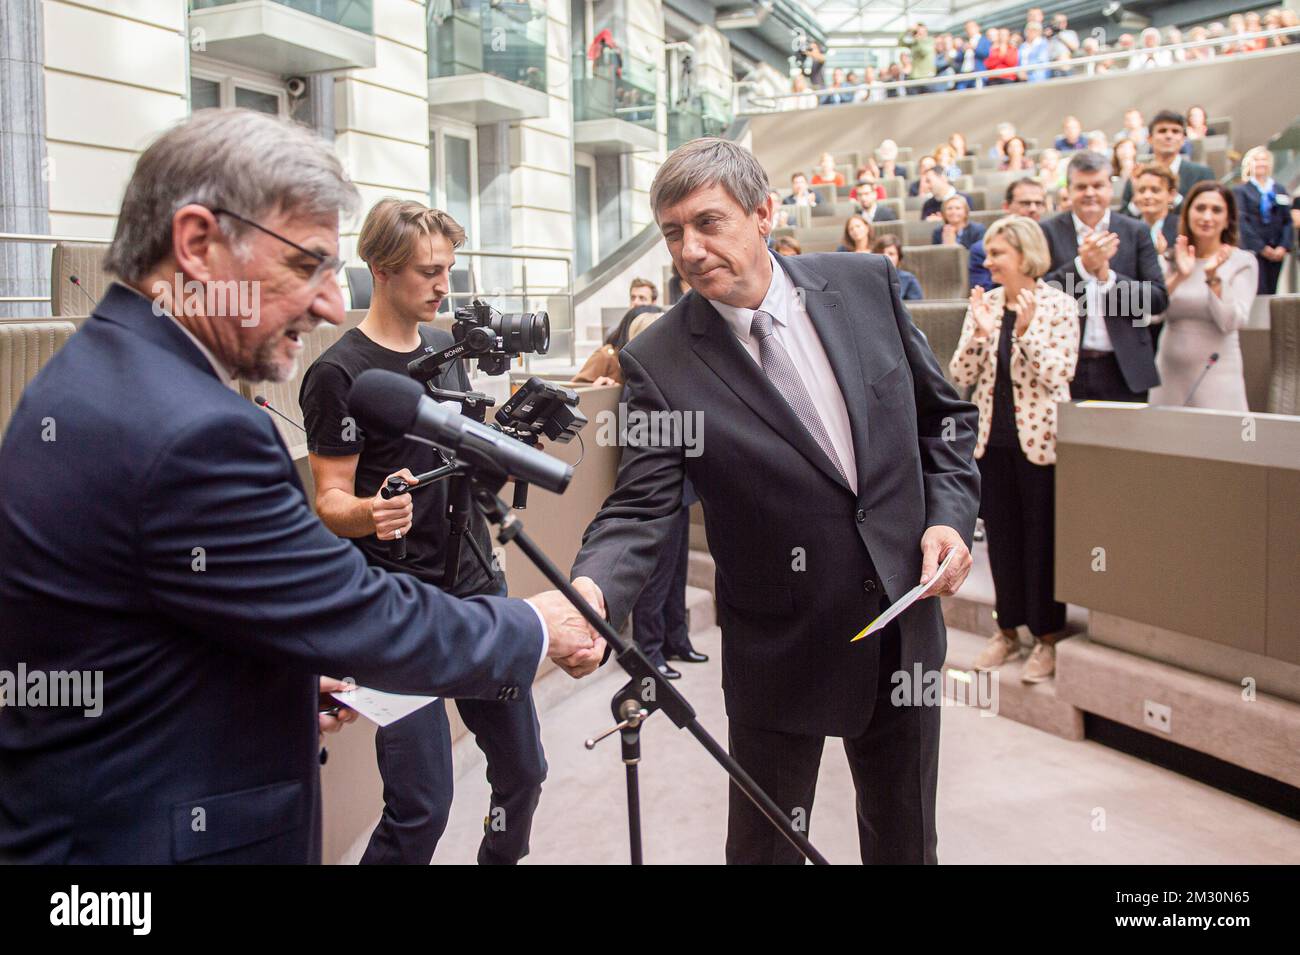 Flemish parliament chairman Wilfried Vandaele and Flemish Minister President N-VA Jan Jambon shake hands during the oath taking ceremony at the start of a plenary session of the Flemish Parliament in Brussels, Wednesday 02 October 2019. The newly formed Flemish government presents its government declaration to the Flemish Parliament. BELGA PHOTO JONAS ROOSENS  Stock Photo